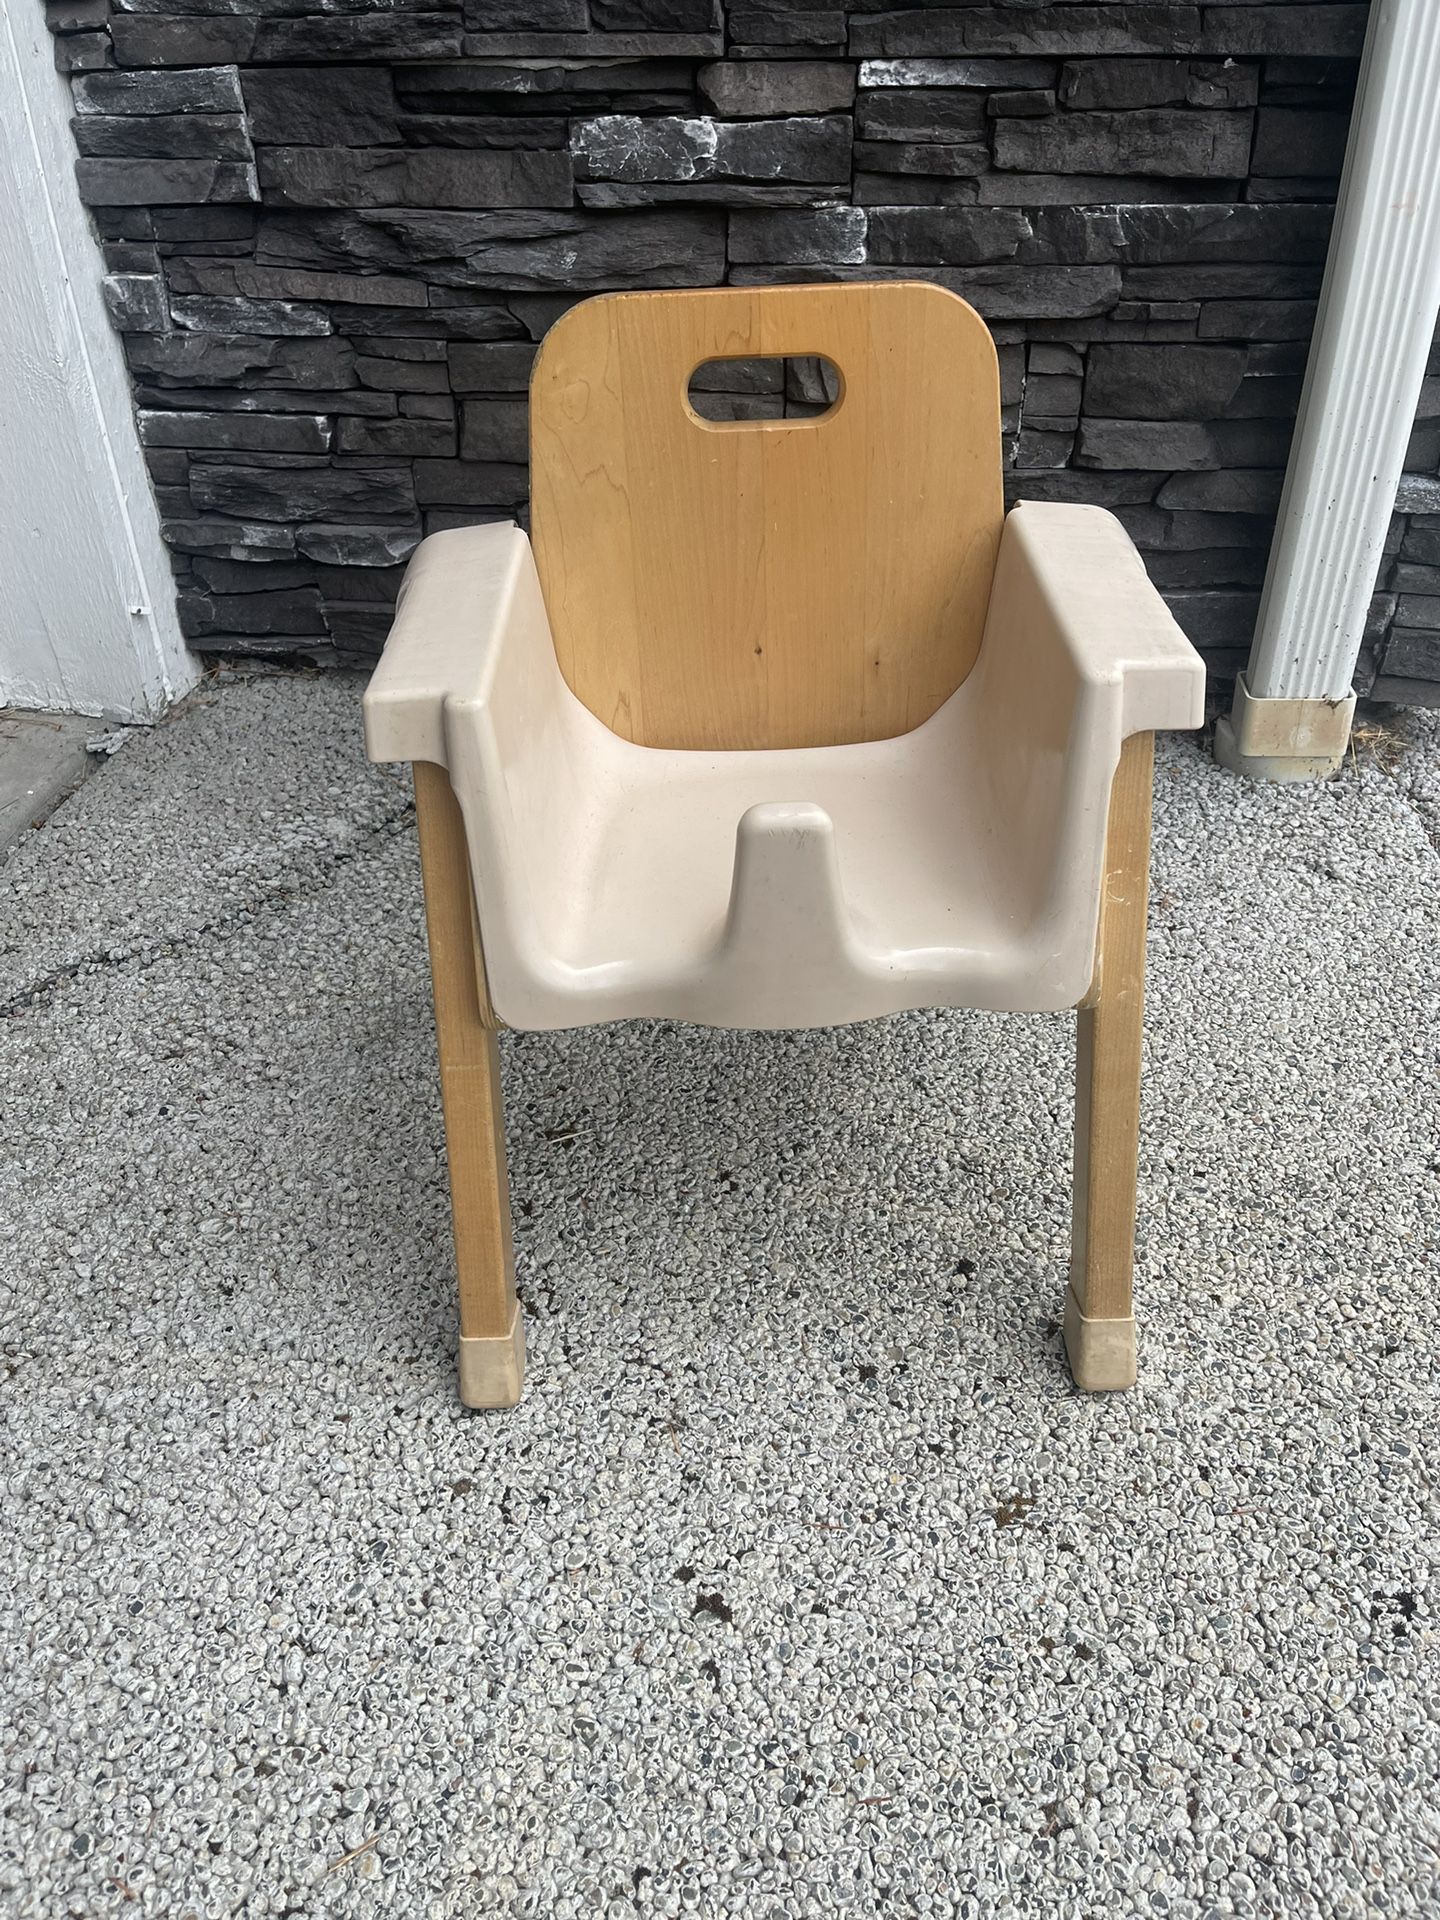 Montessori Toddler Chair With Desk